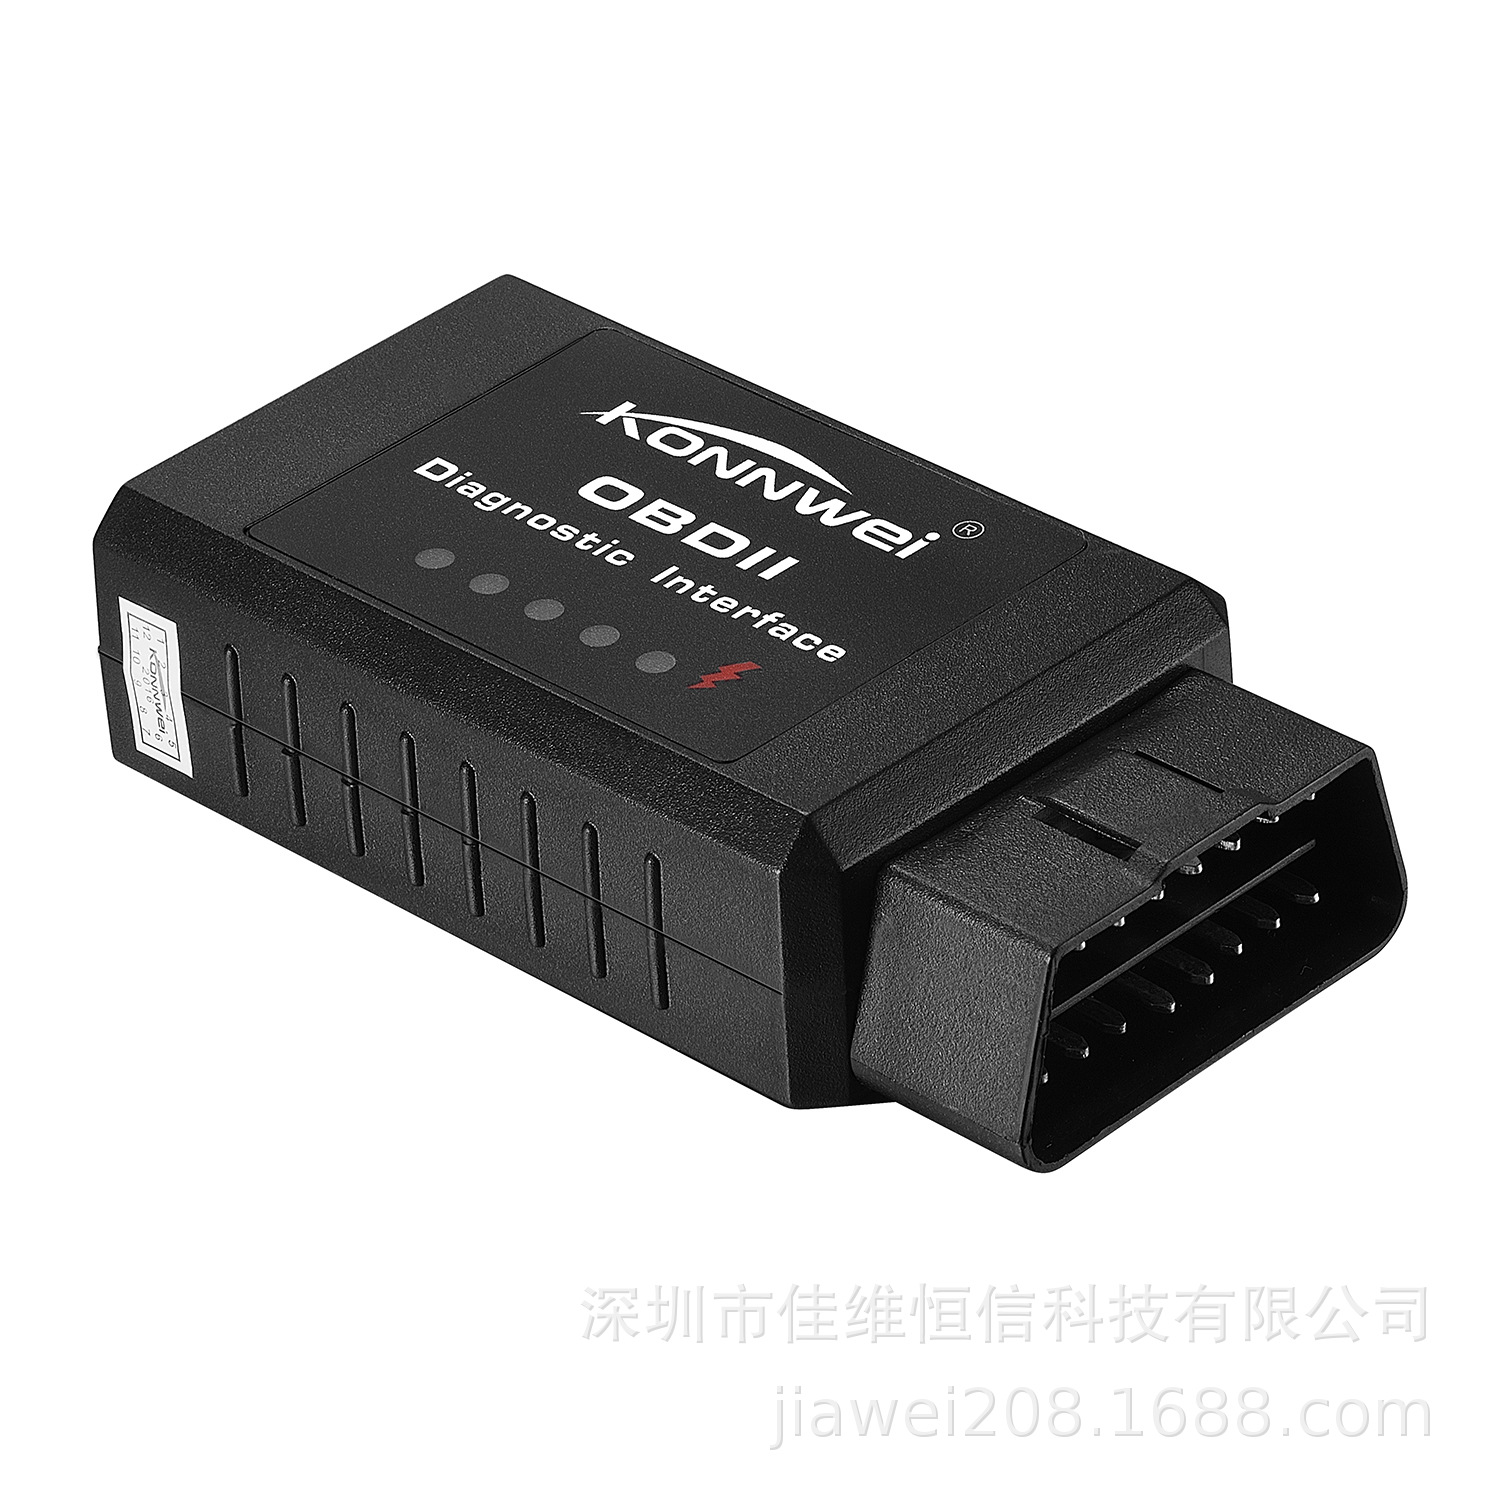 KW910 OBD2 Bluetooth Scanner Auto Fout Diagnose Instrument Detector Tool Auto Diagnostische Scan Tool Fout Tester